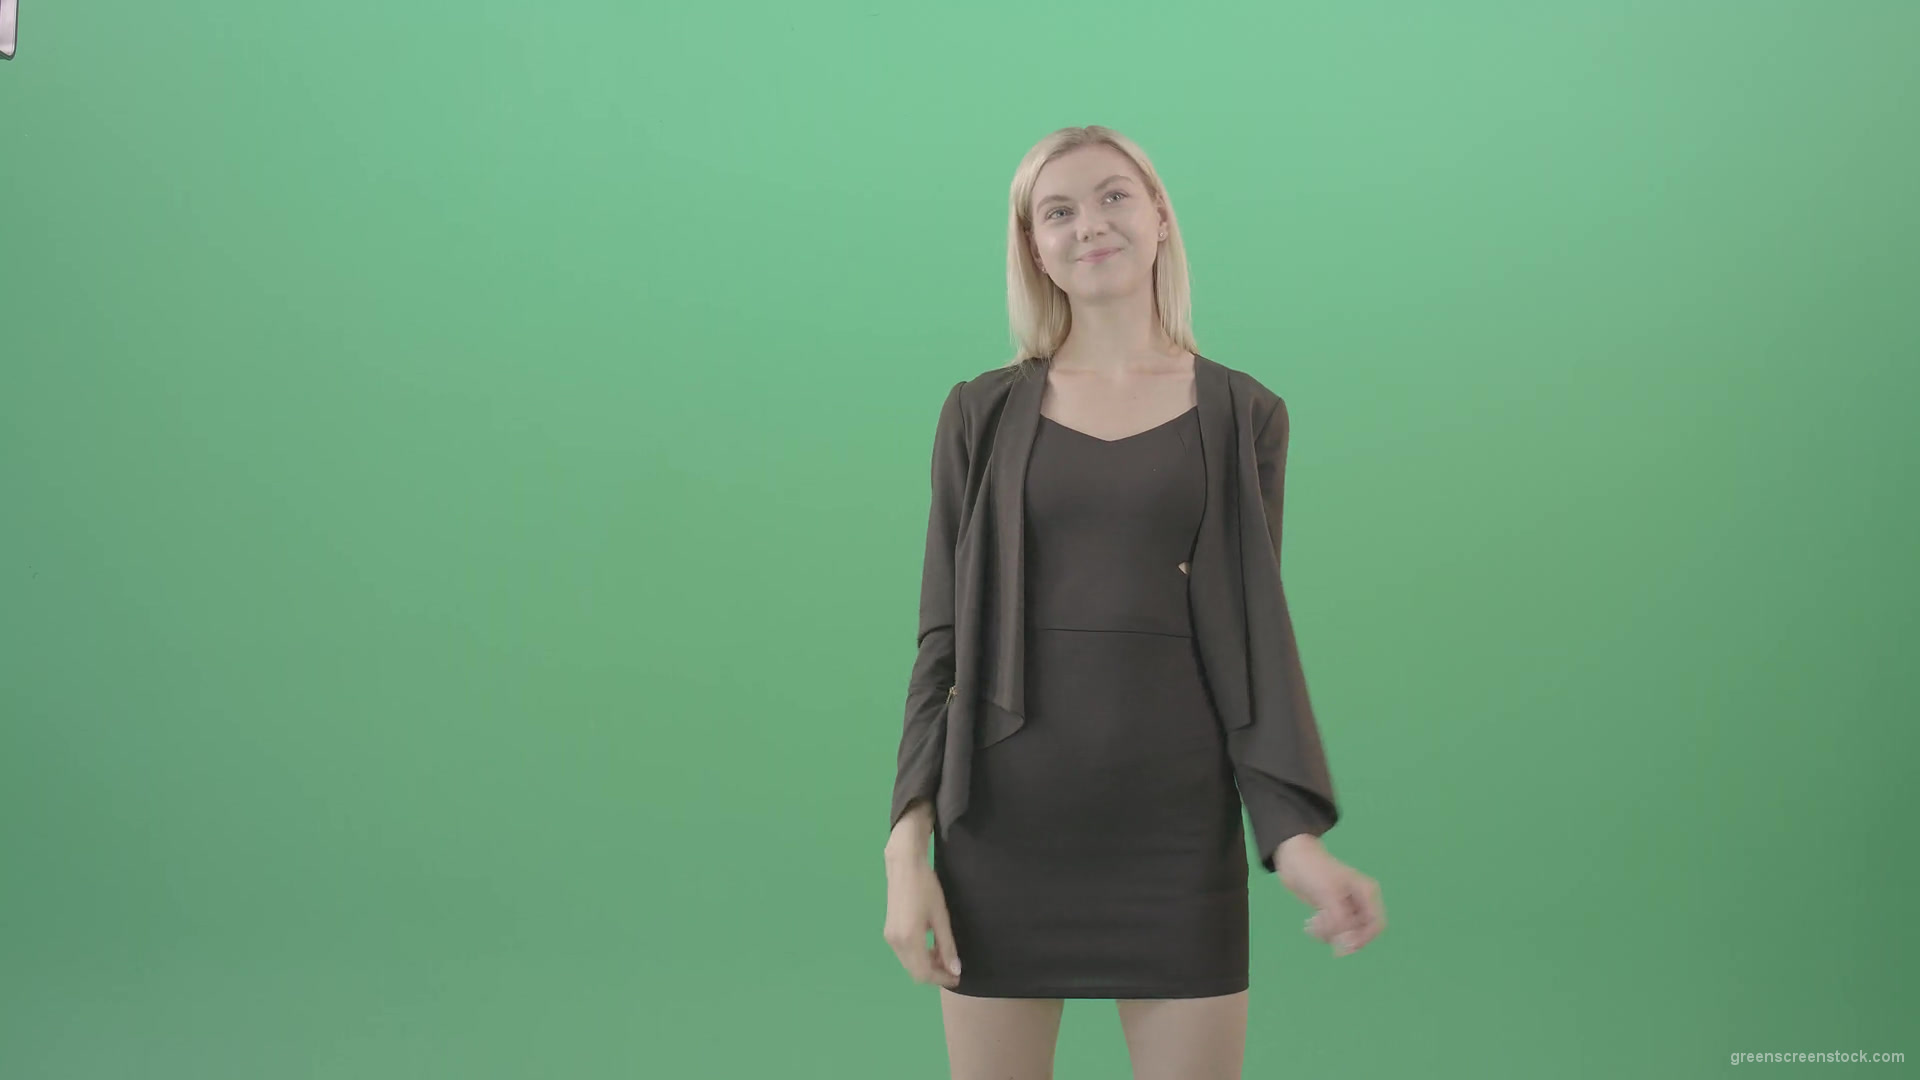 Girl-searching-in-internet-virtual-shopping-on-touch-screen-on-green-background-4K-Video-Footage-1920_009 Green Screen Stock